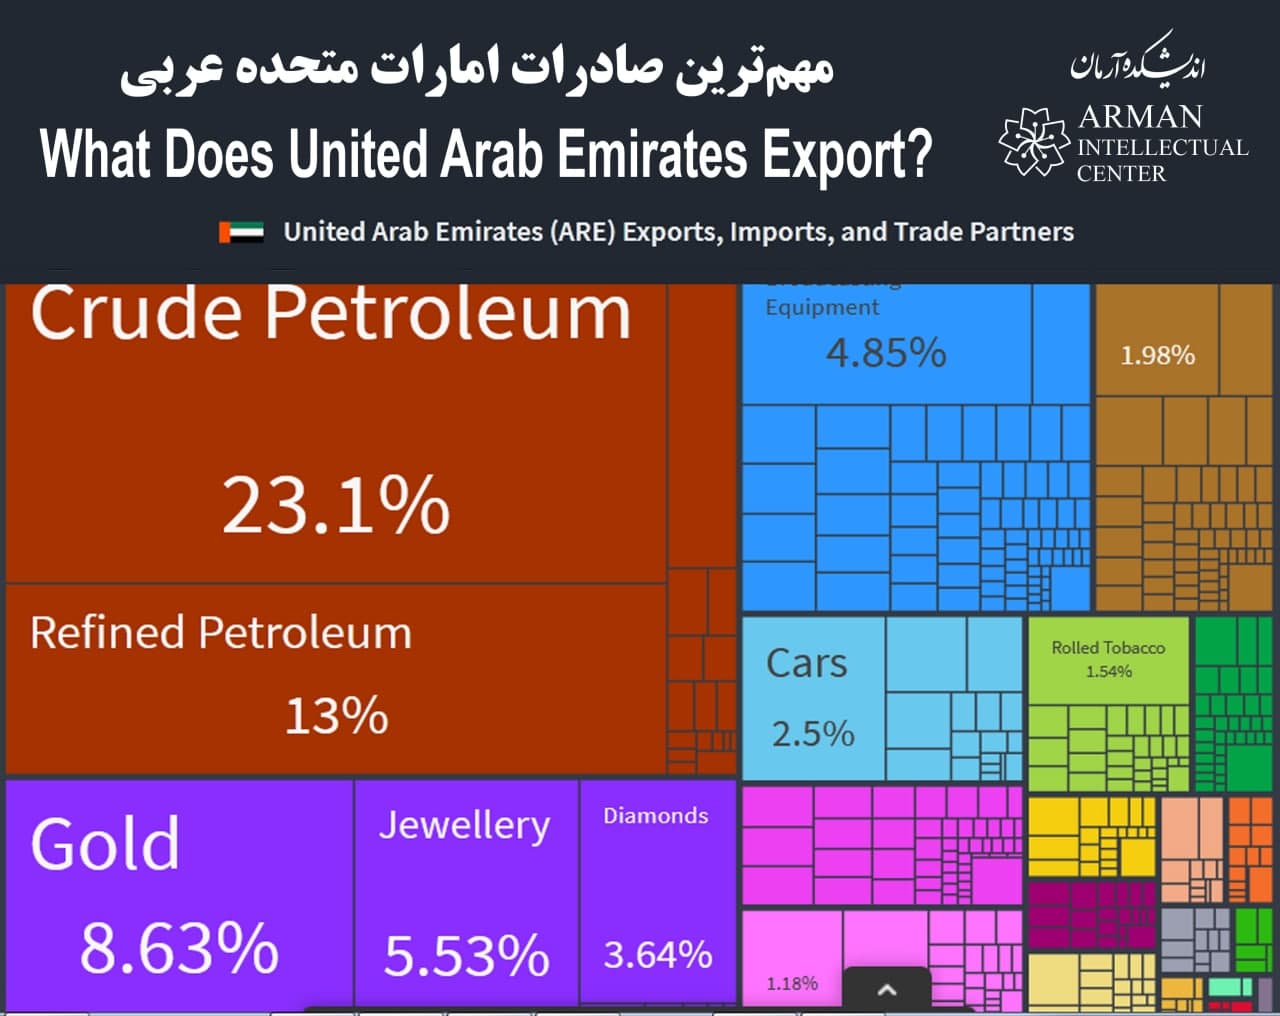 TheMain Export of the UAE